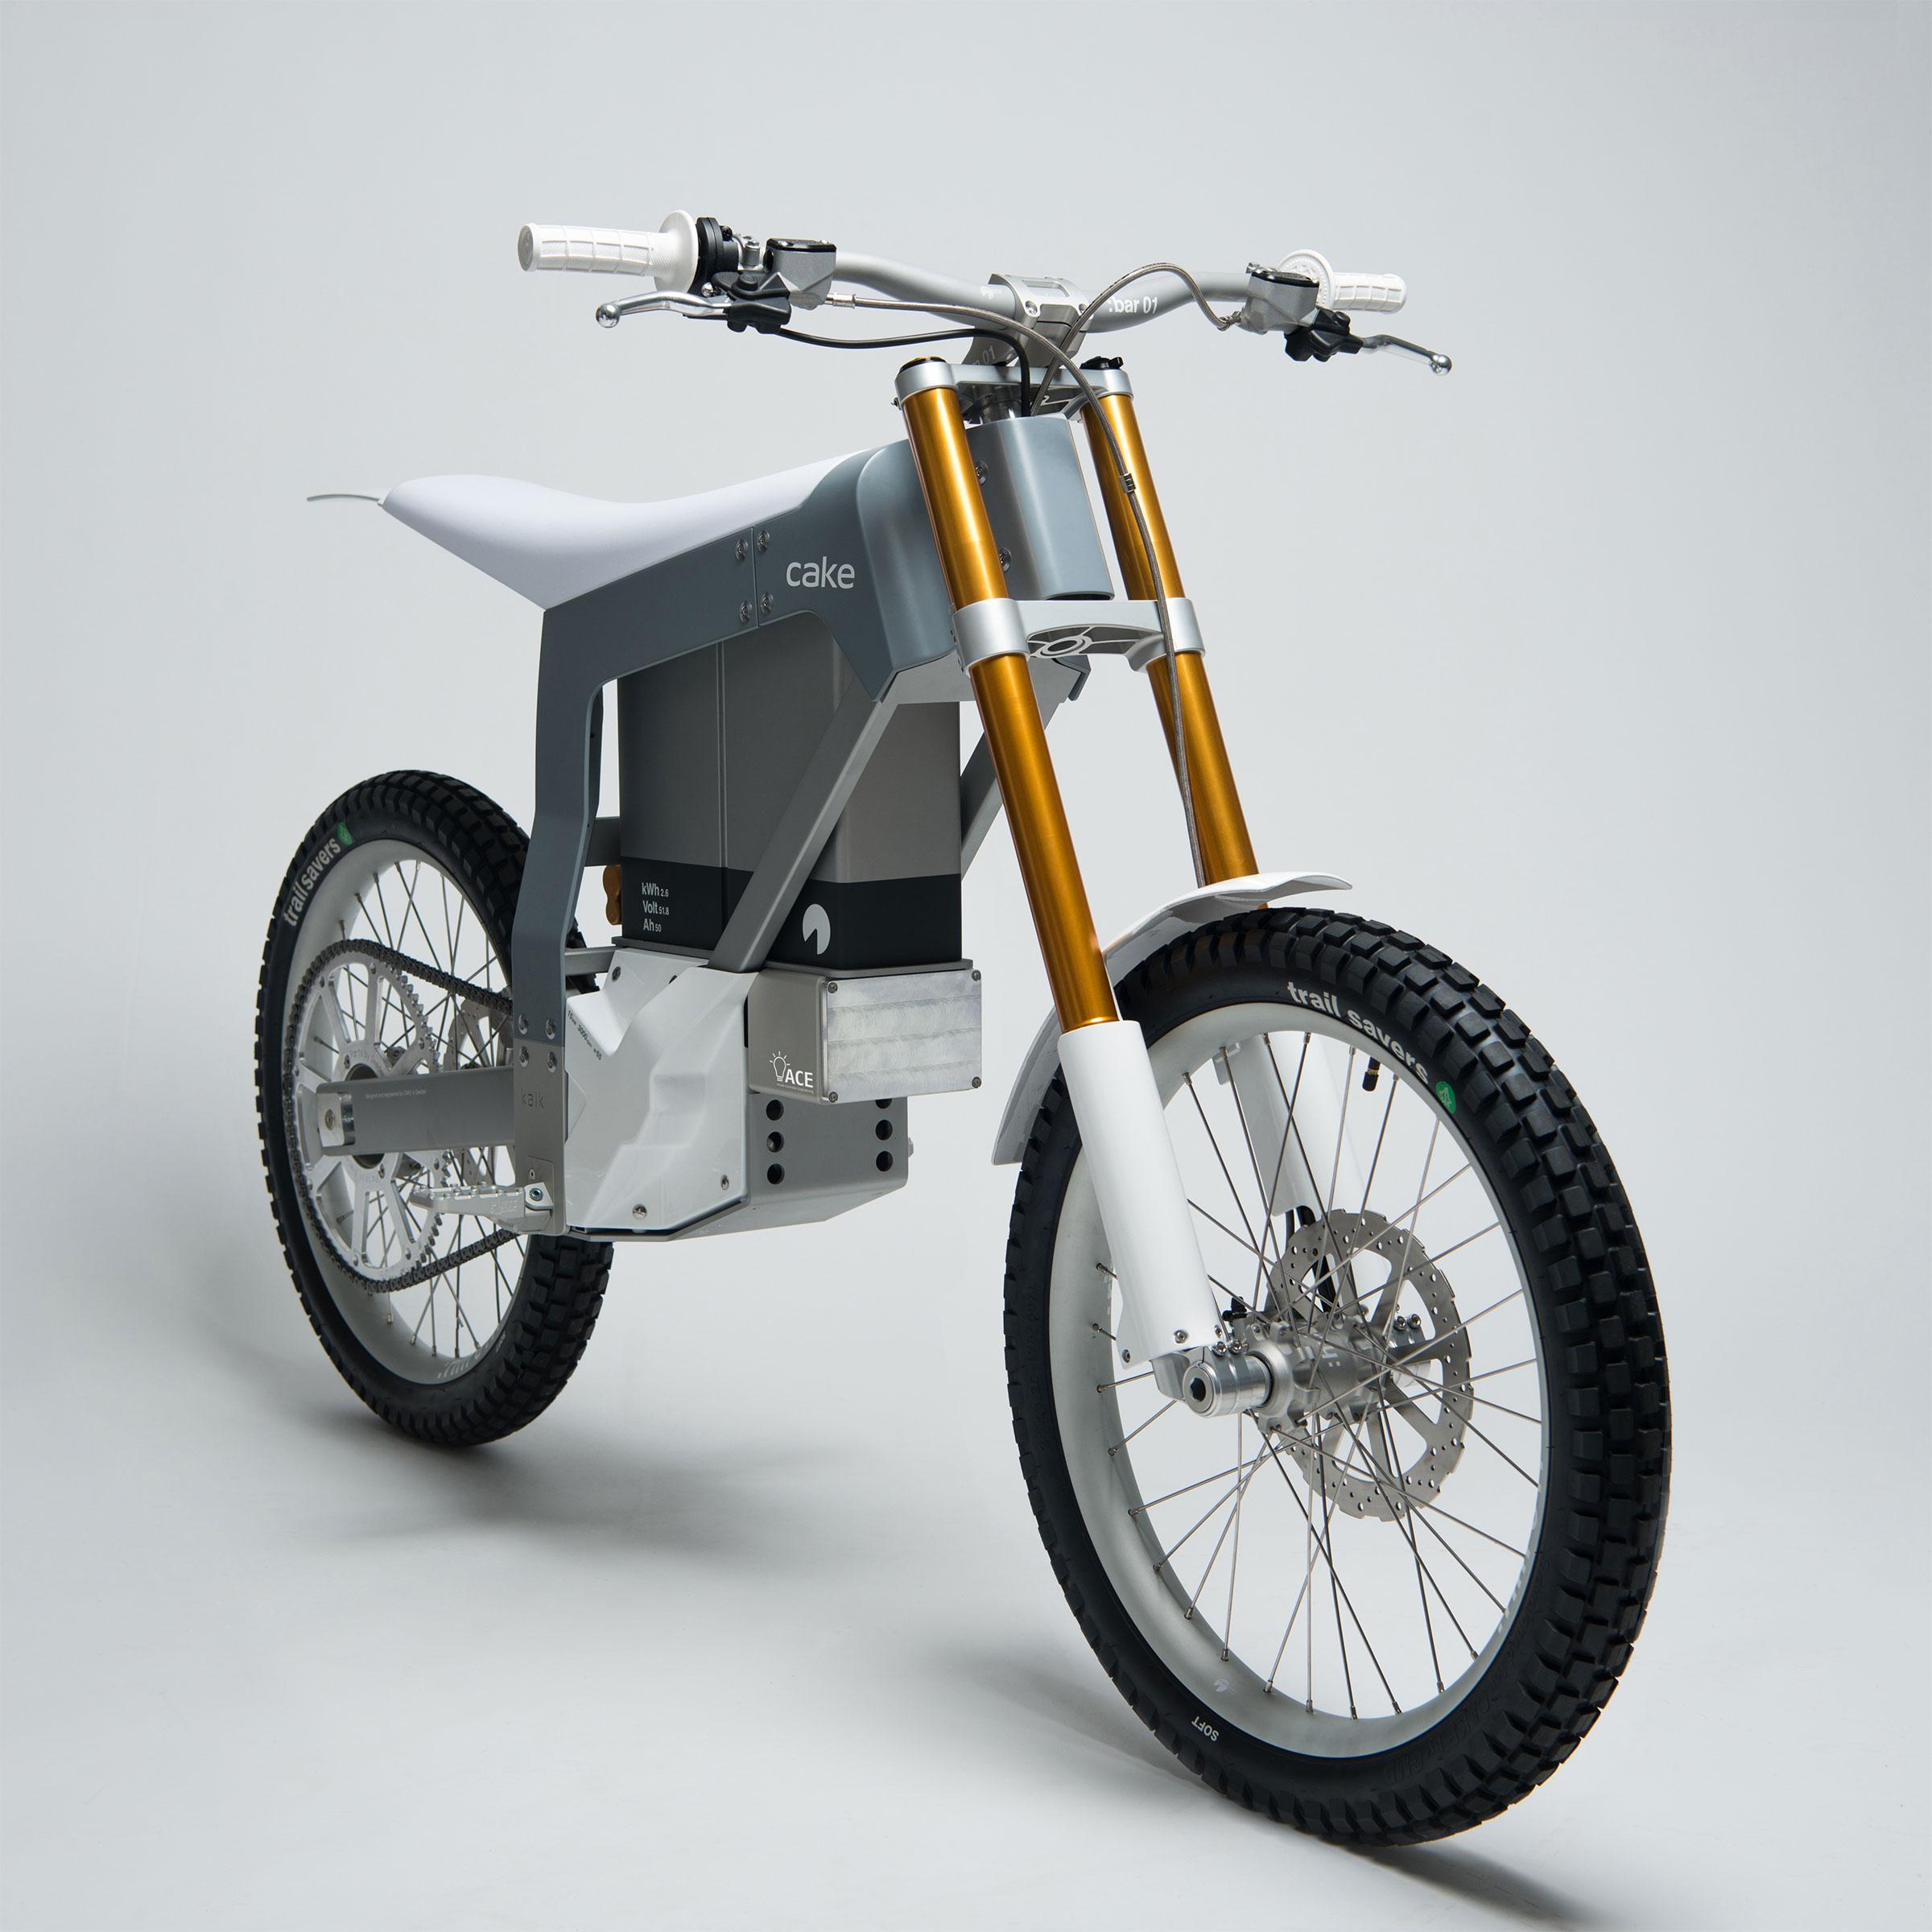 CAKE Is Giving Us The KALK. An Electric Dirt Bike